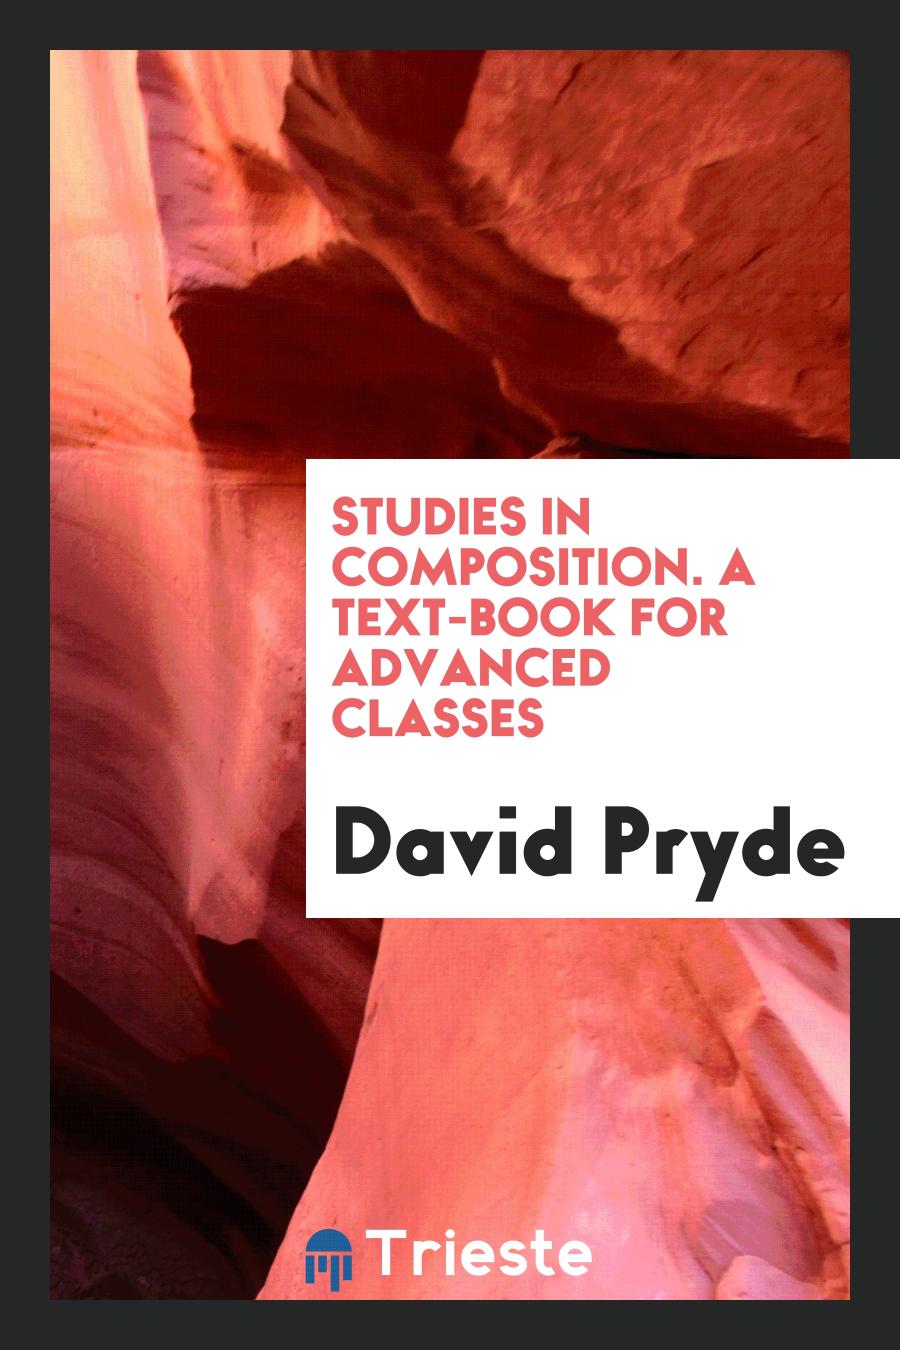 Studies in Composition. A Text-Book for Advanced Classes